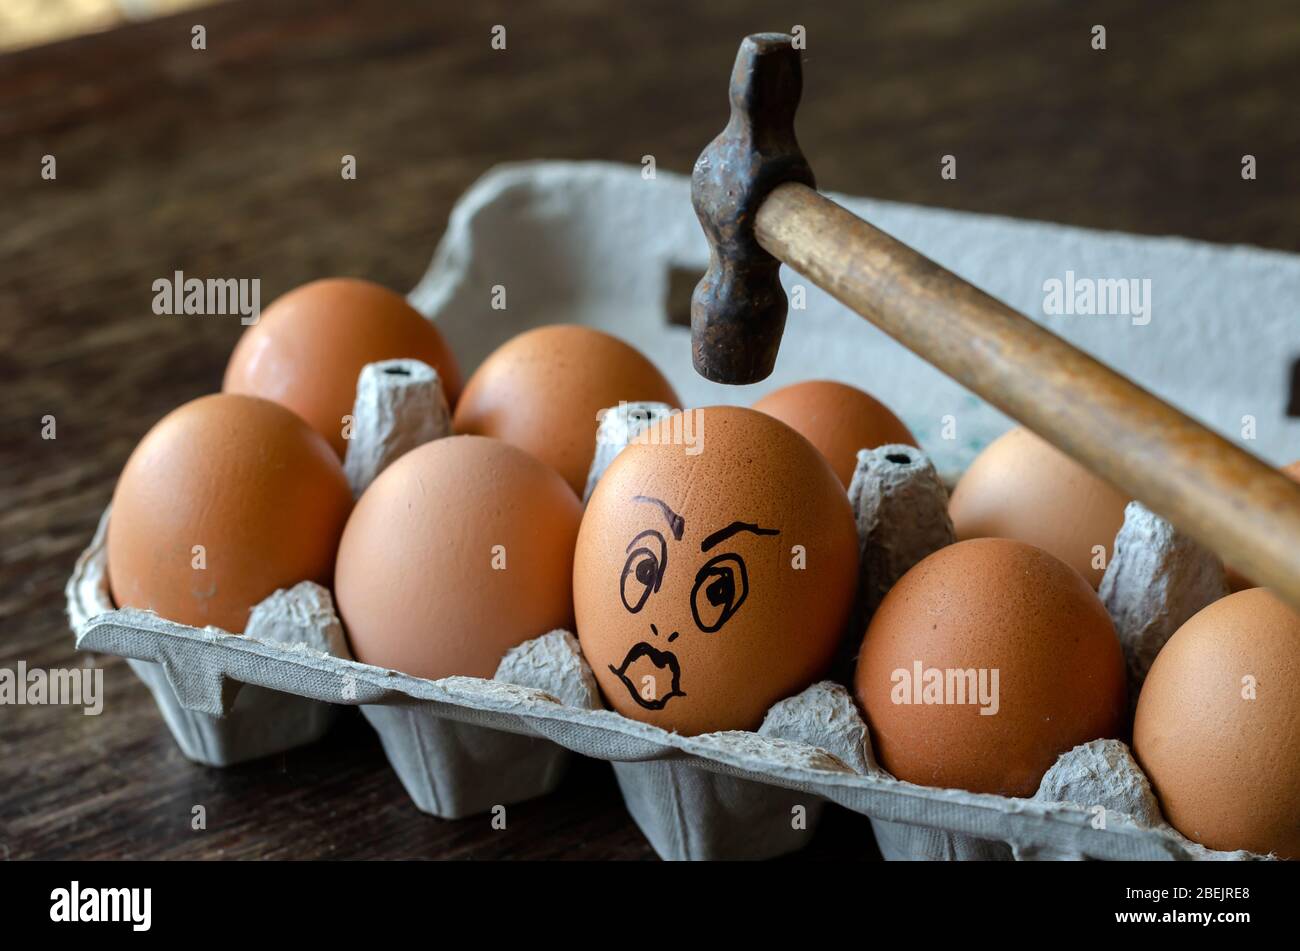 Surprised chicken egg in the tray. A raw chicken egg with a grimace of surprise or indignation in front of a hammer. Angled side view. Close-up. Selec Stock Photo